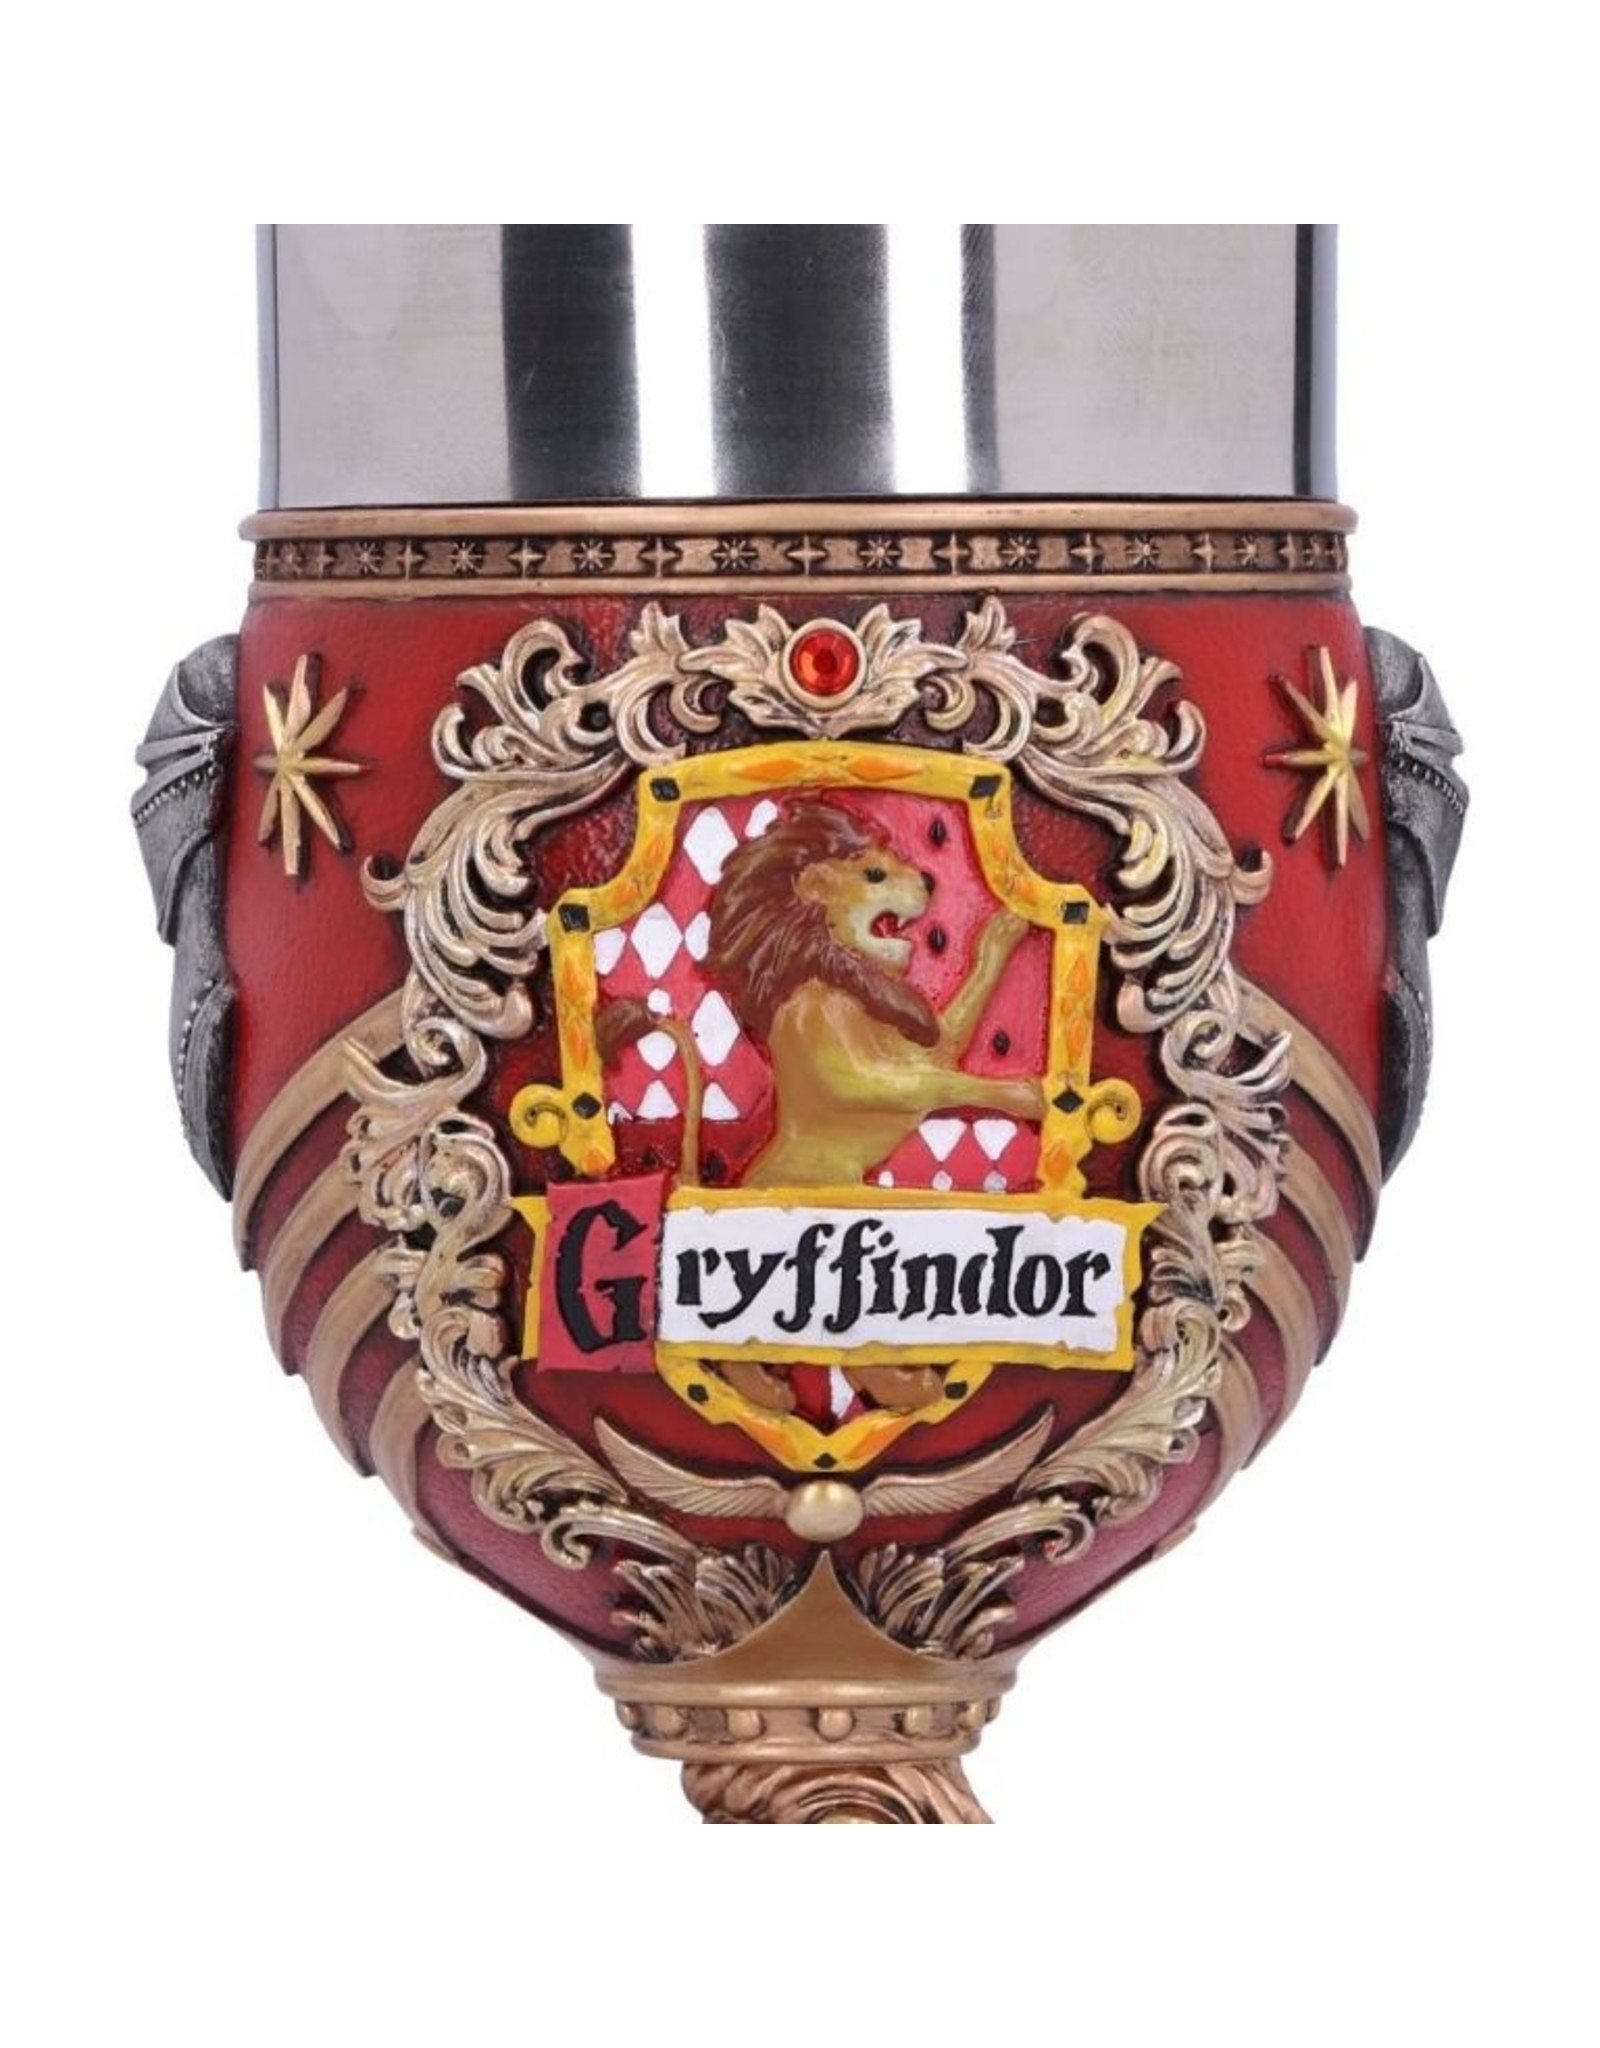 NemesisNow Giftware & Lifestyle - Harry Potter Gryffindor Collectible Goblet